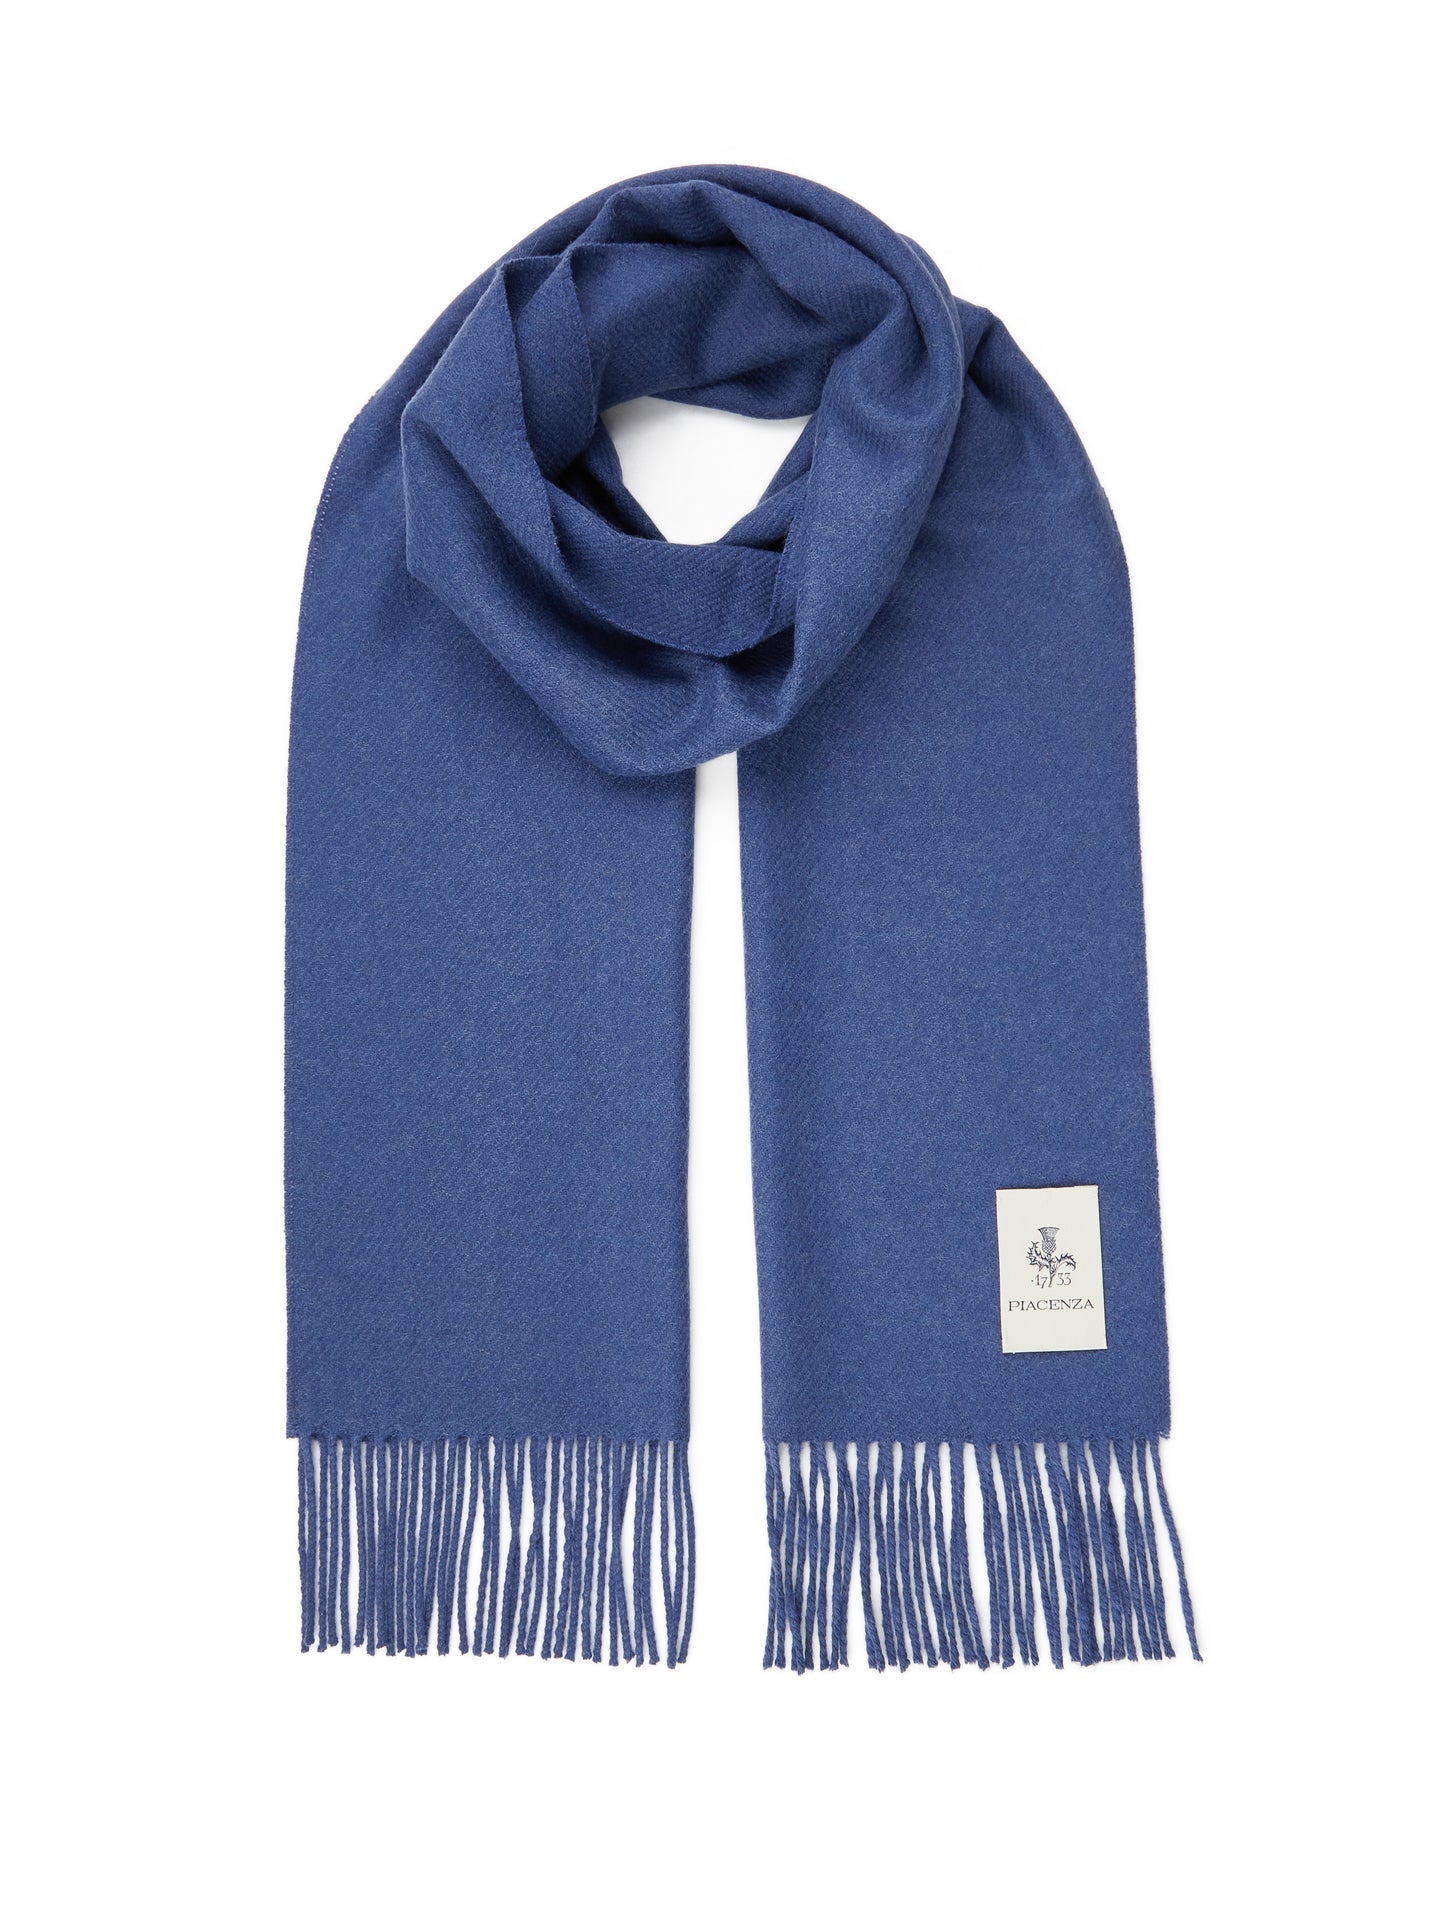 California scarf with fringes in light blue Baby Camel – Piacenza Cashmere